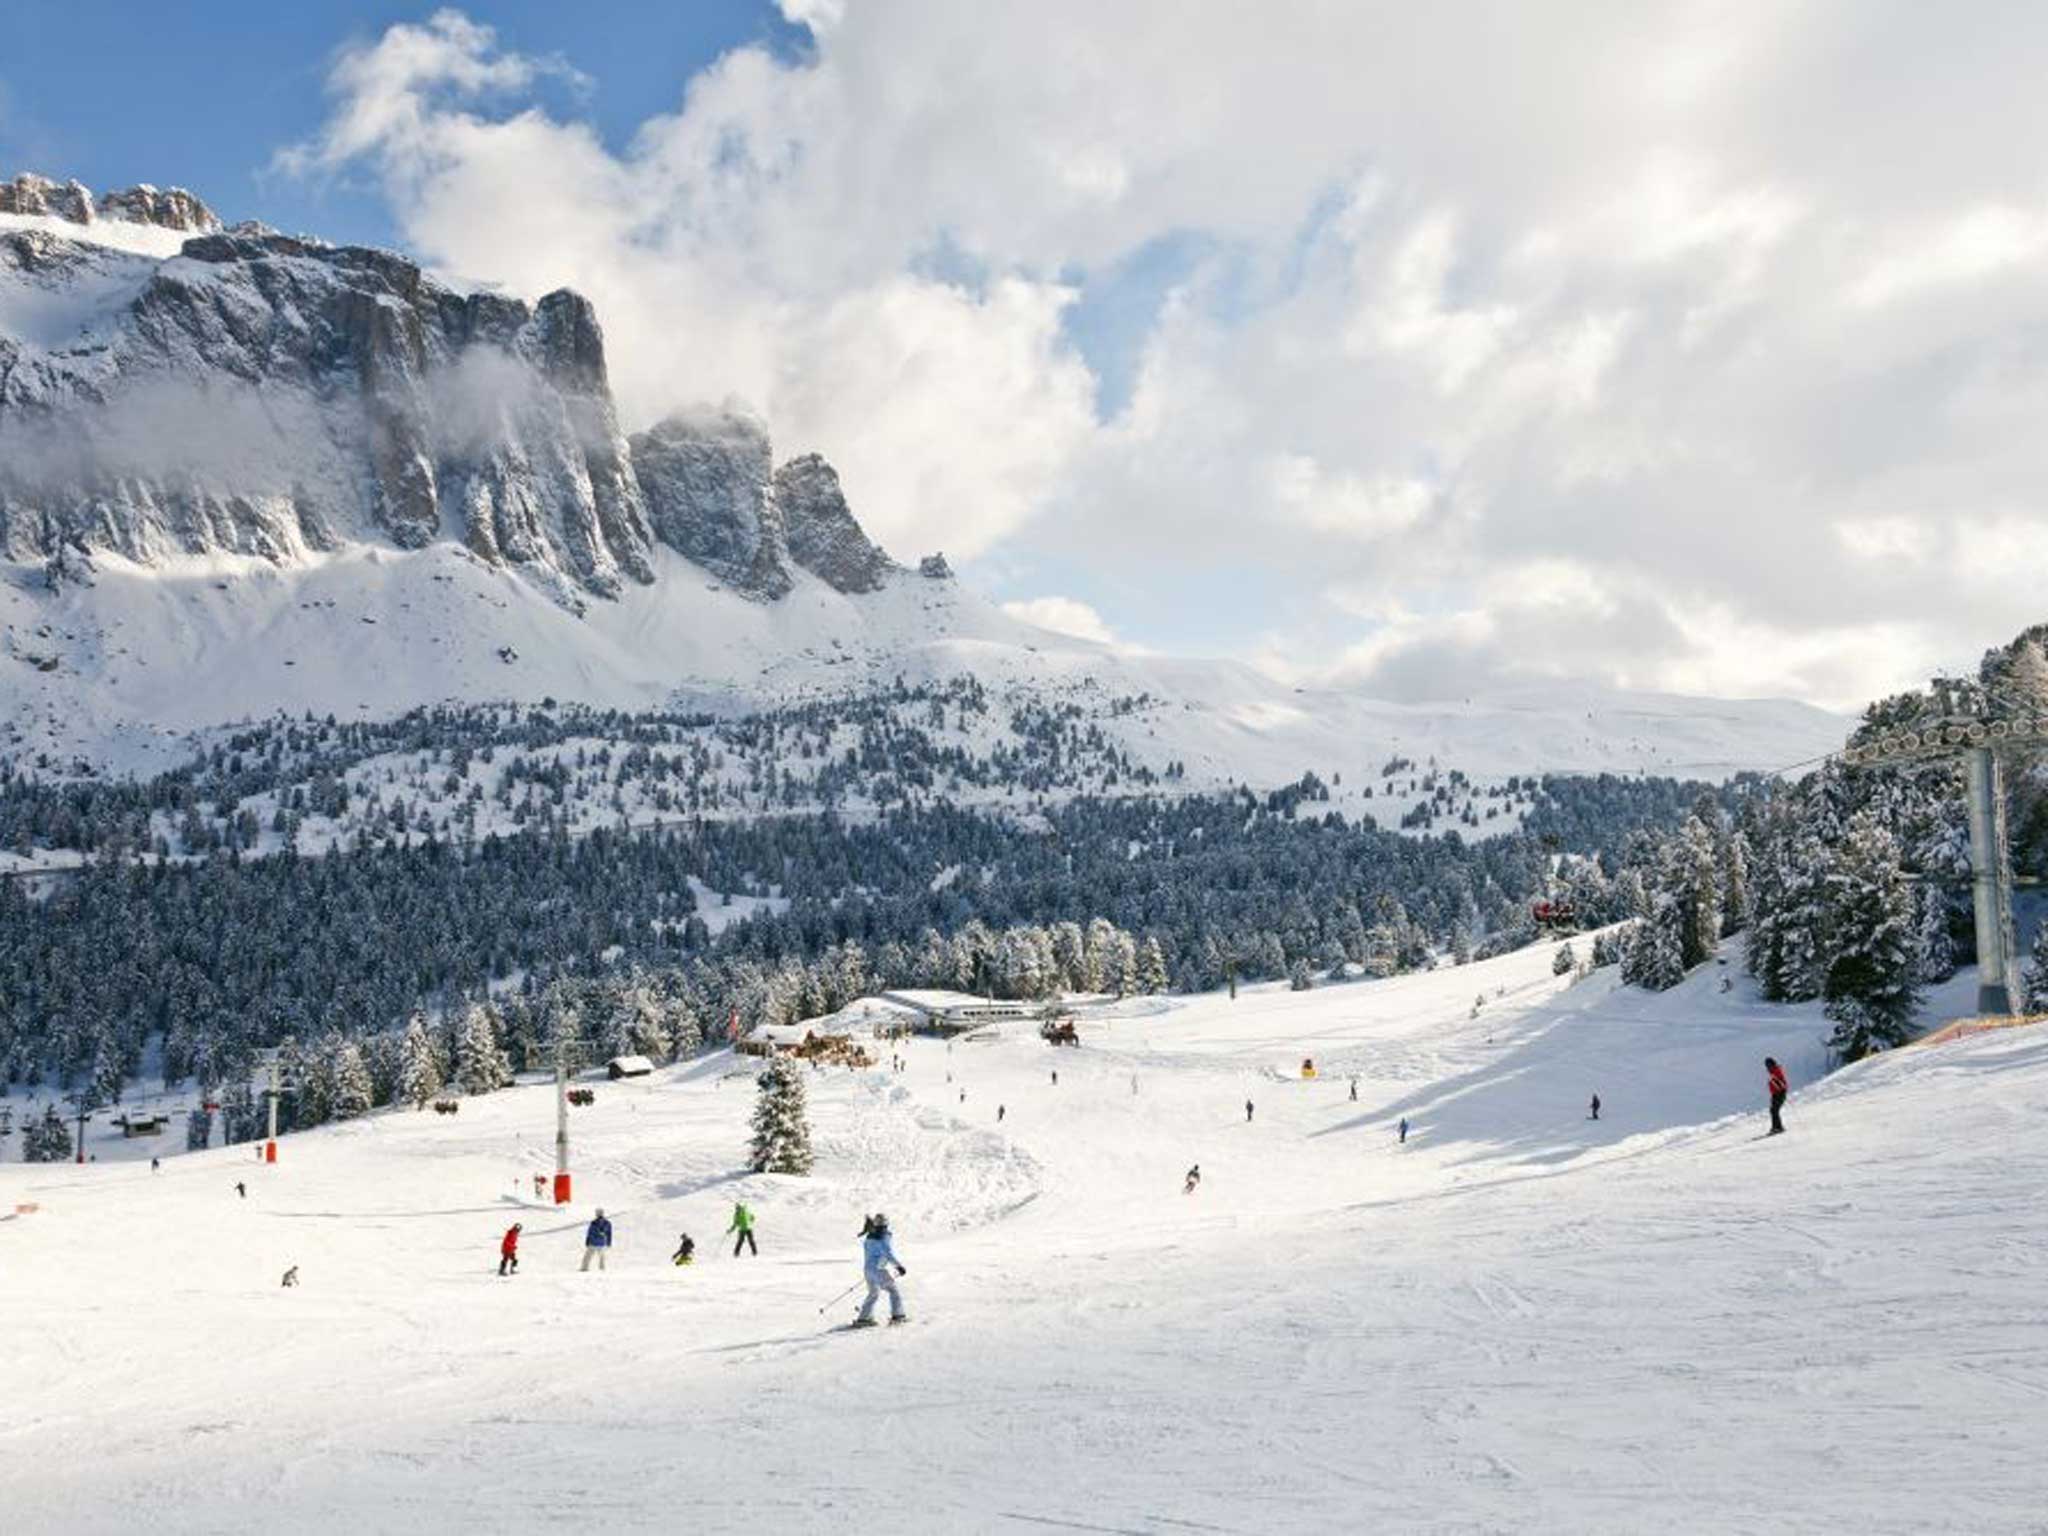 Deep and crisp: The Dolomites have received record snowfall